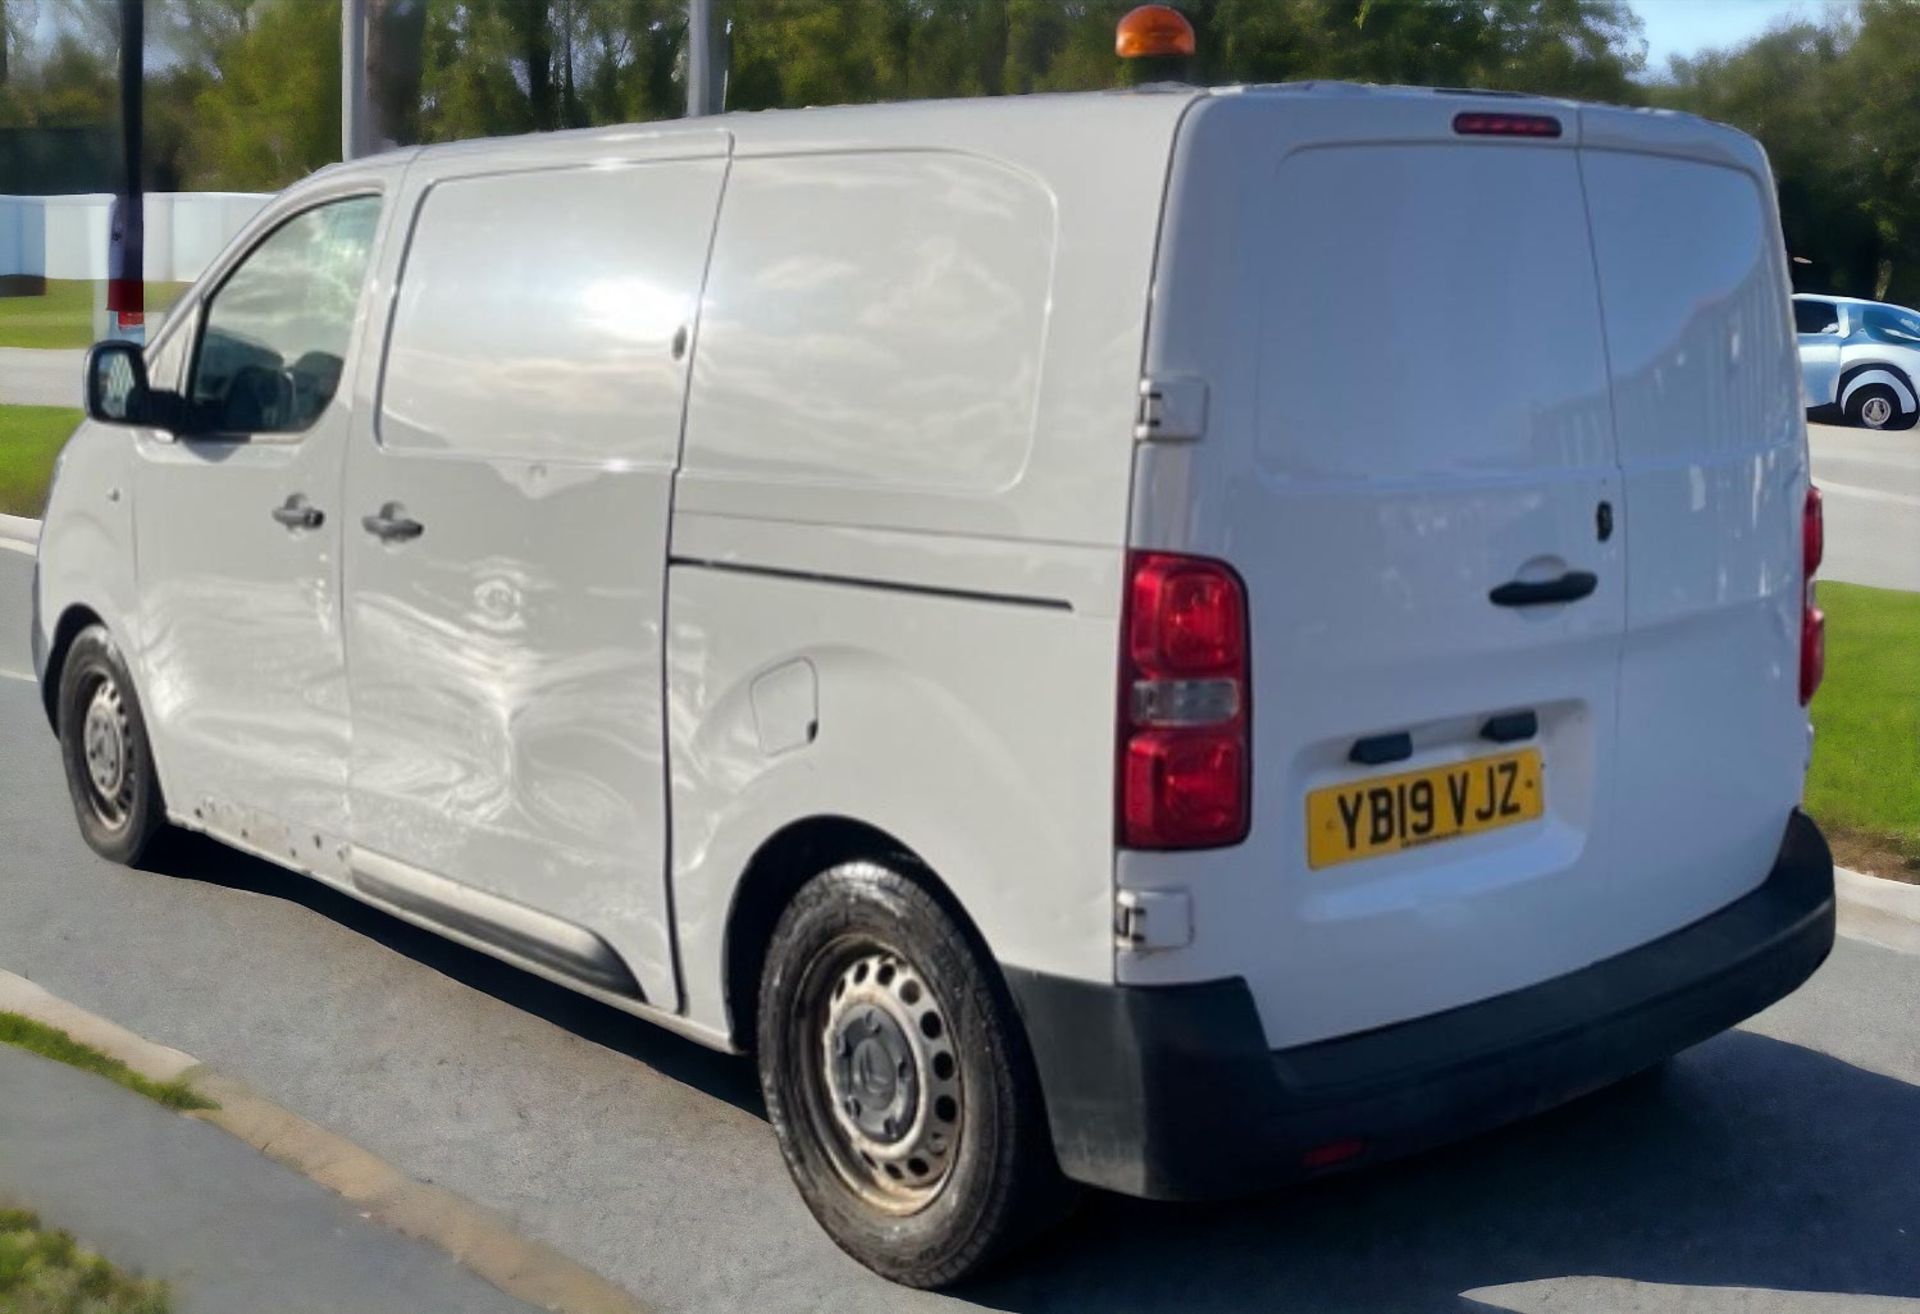 2019-19 REG CITROEN DISPATCH XS 1000 L1H1 - HPI CLEAR - READY TO GO! - Image 3 of 12